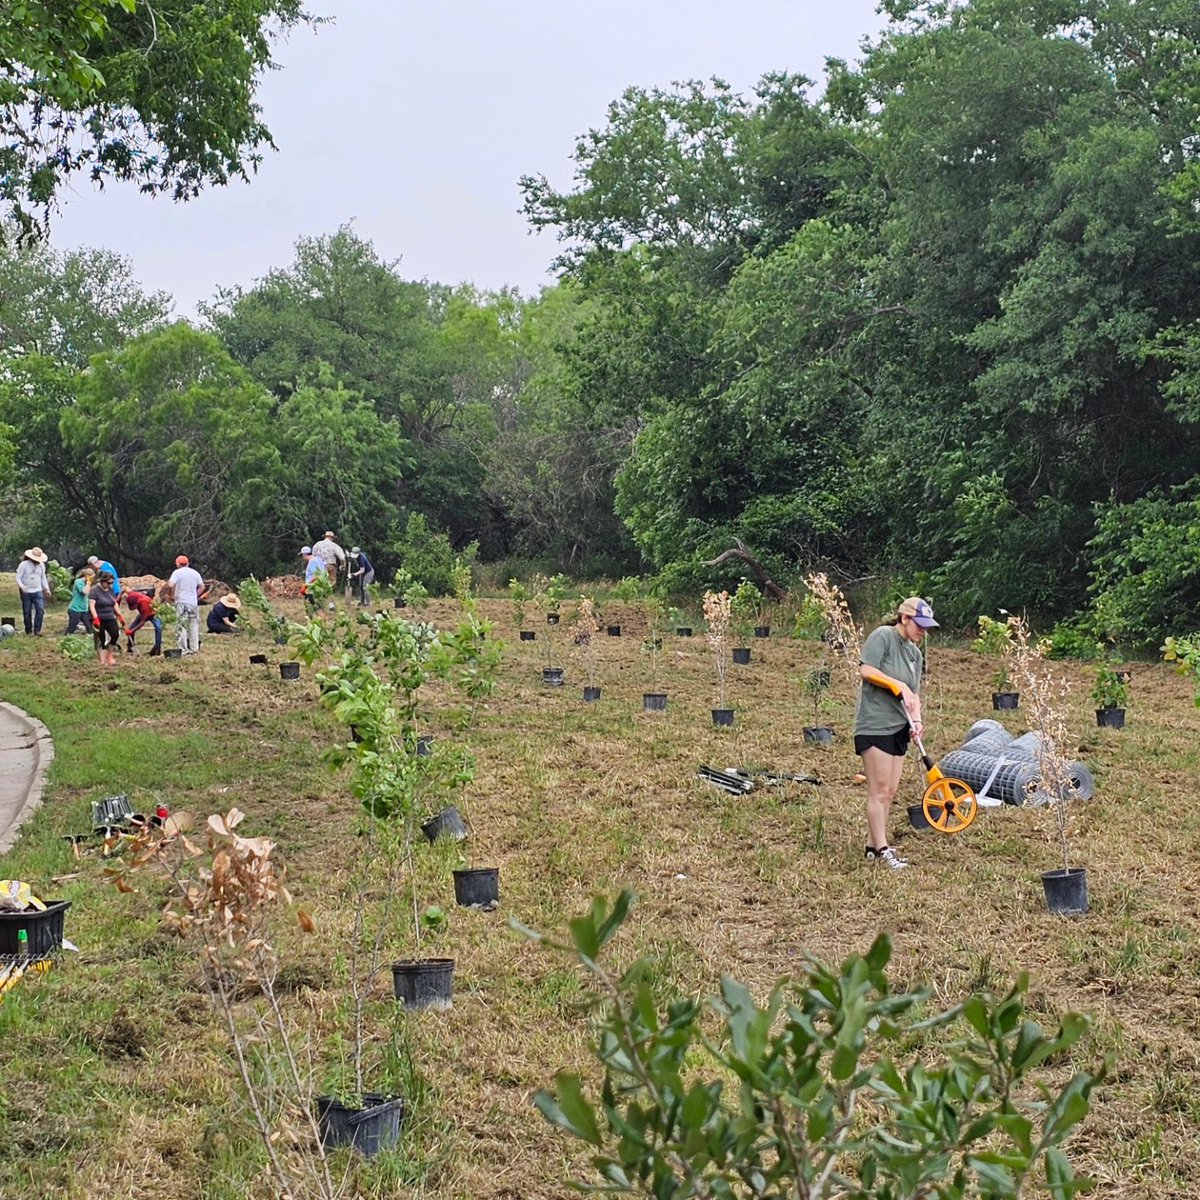 Thank you to everyone who joined us in supporting the @ArboretumSan to plant 125 trees today! What an awesome way to celebrate #ArborDay!